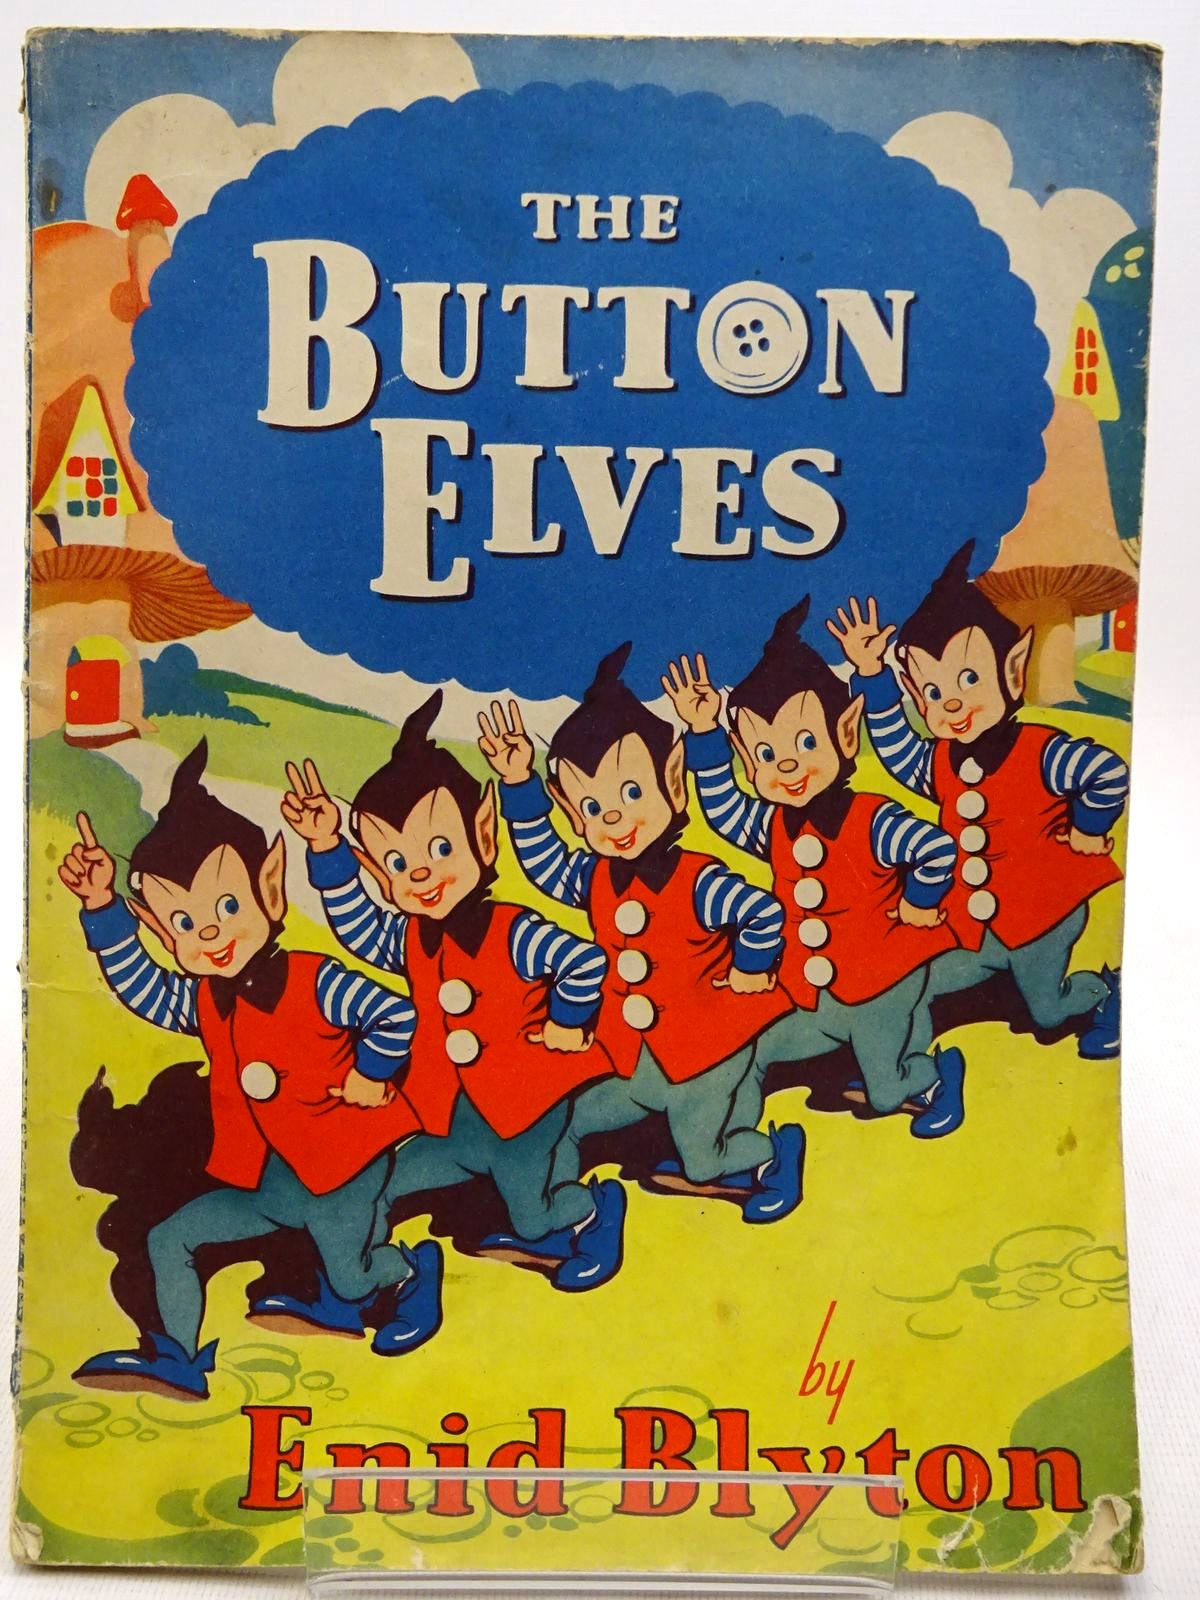 Photo of THE BUTTON ELVES written by Blyton, Enid published by J. Coker &amp; Co. Ltd. (STOCK CODE: 2128865)  for sale by Stella & Rose's Books